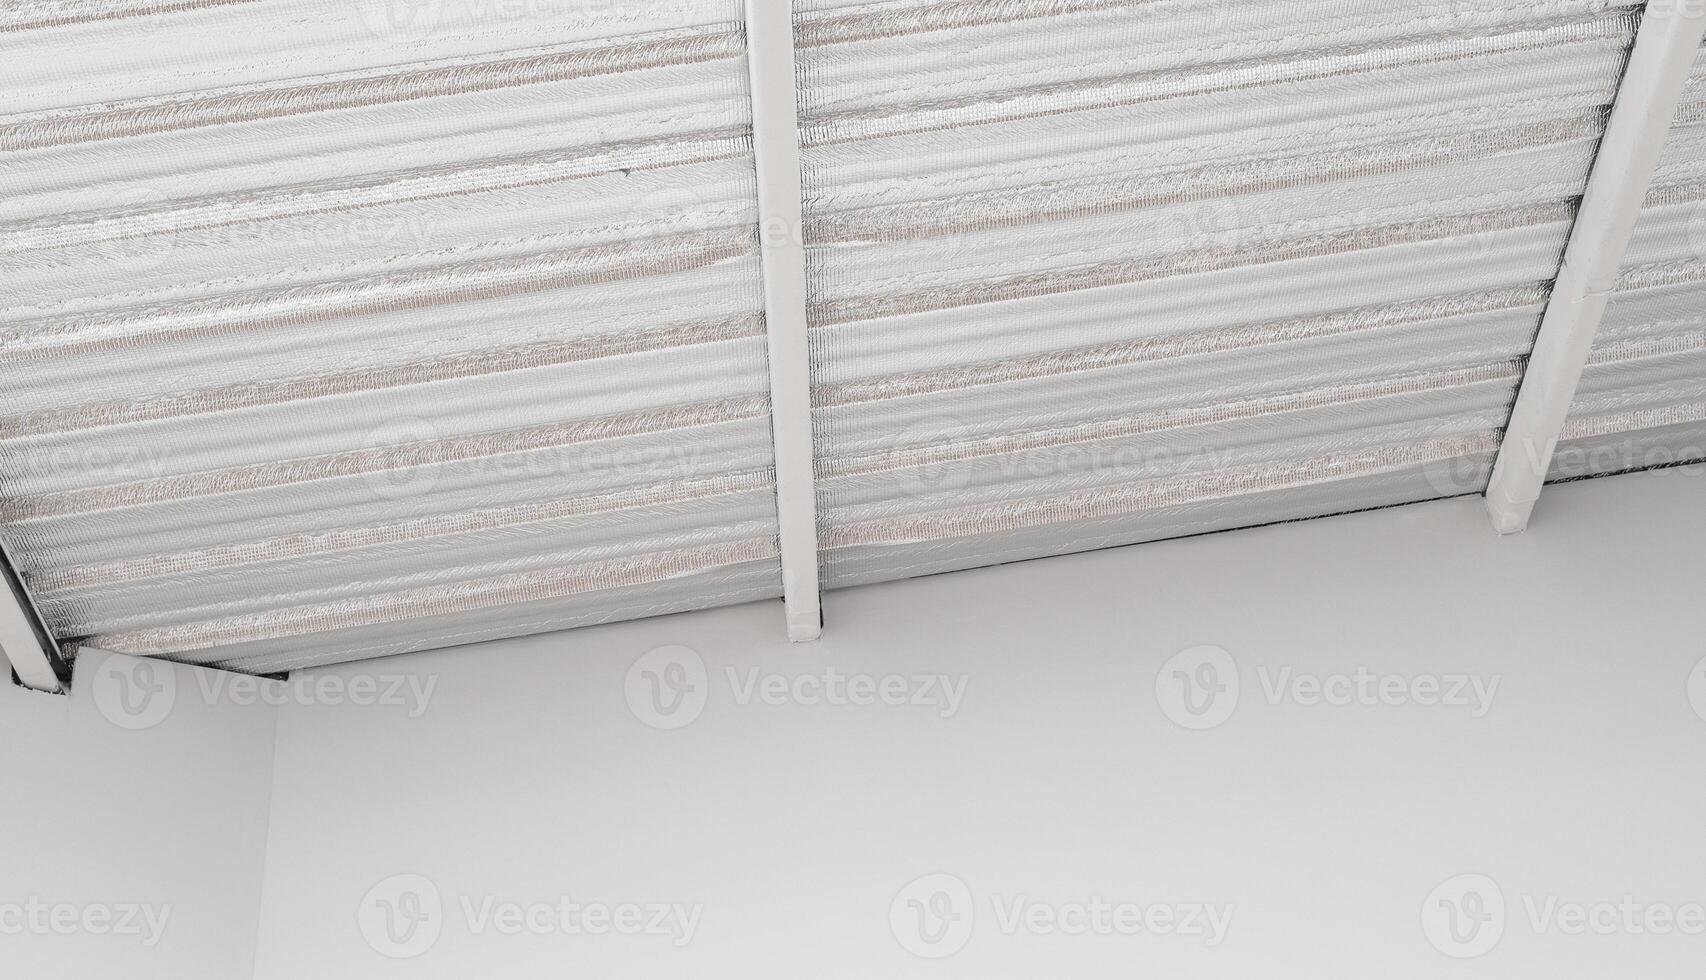 industrial grade metal roof insulation. heat resistant sheet foil provides thermal protection and energy efficiency. corrugated design and silver texture add modern and abstract touch to construction. photo